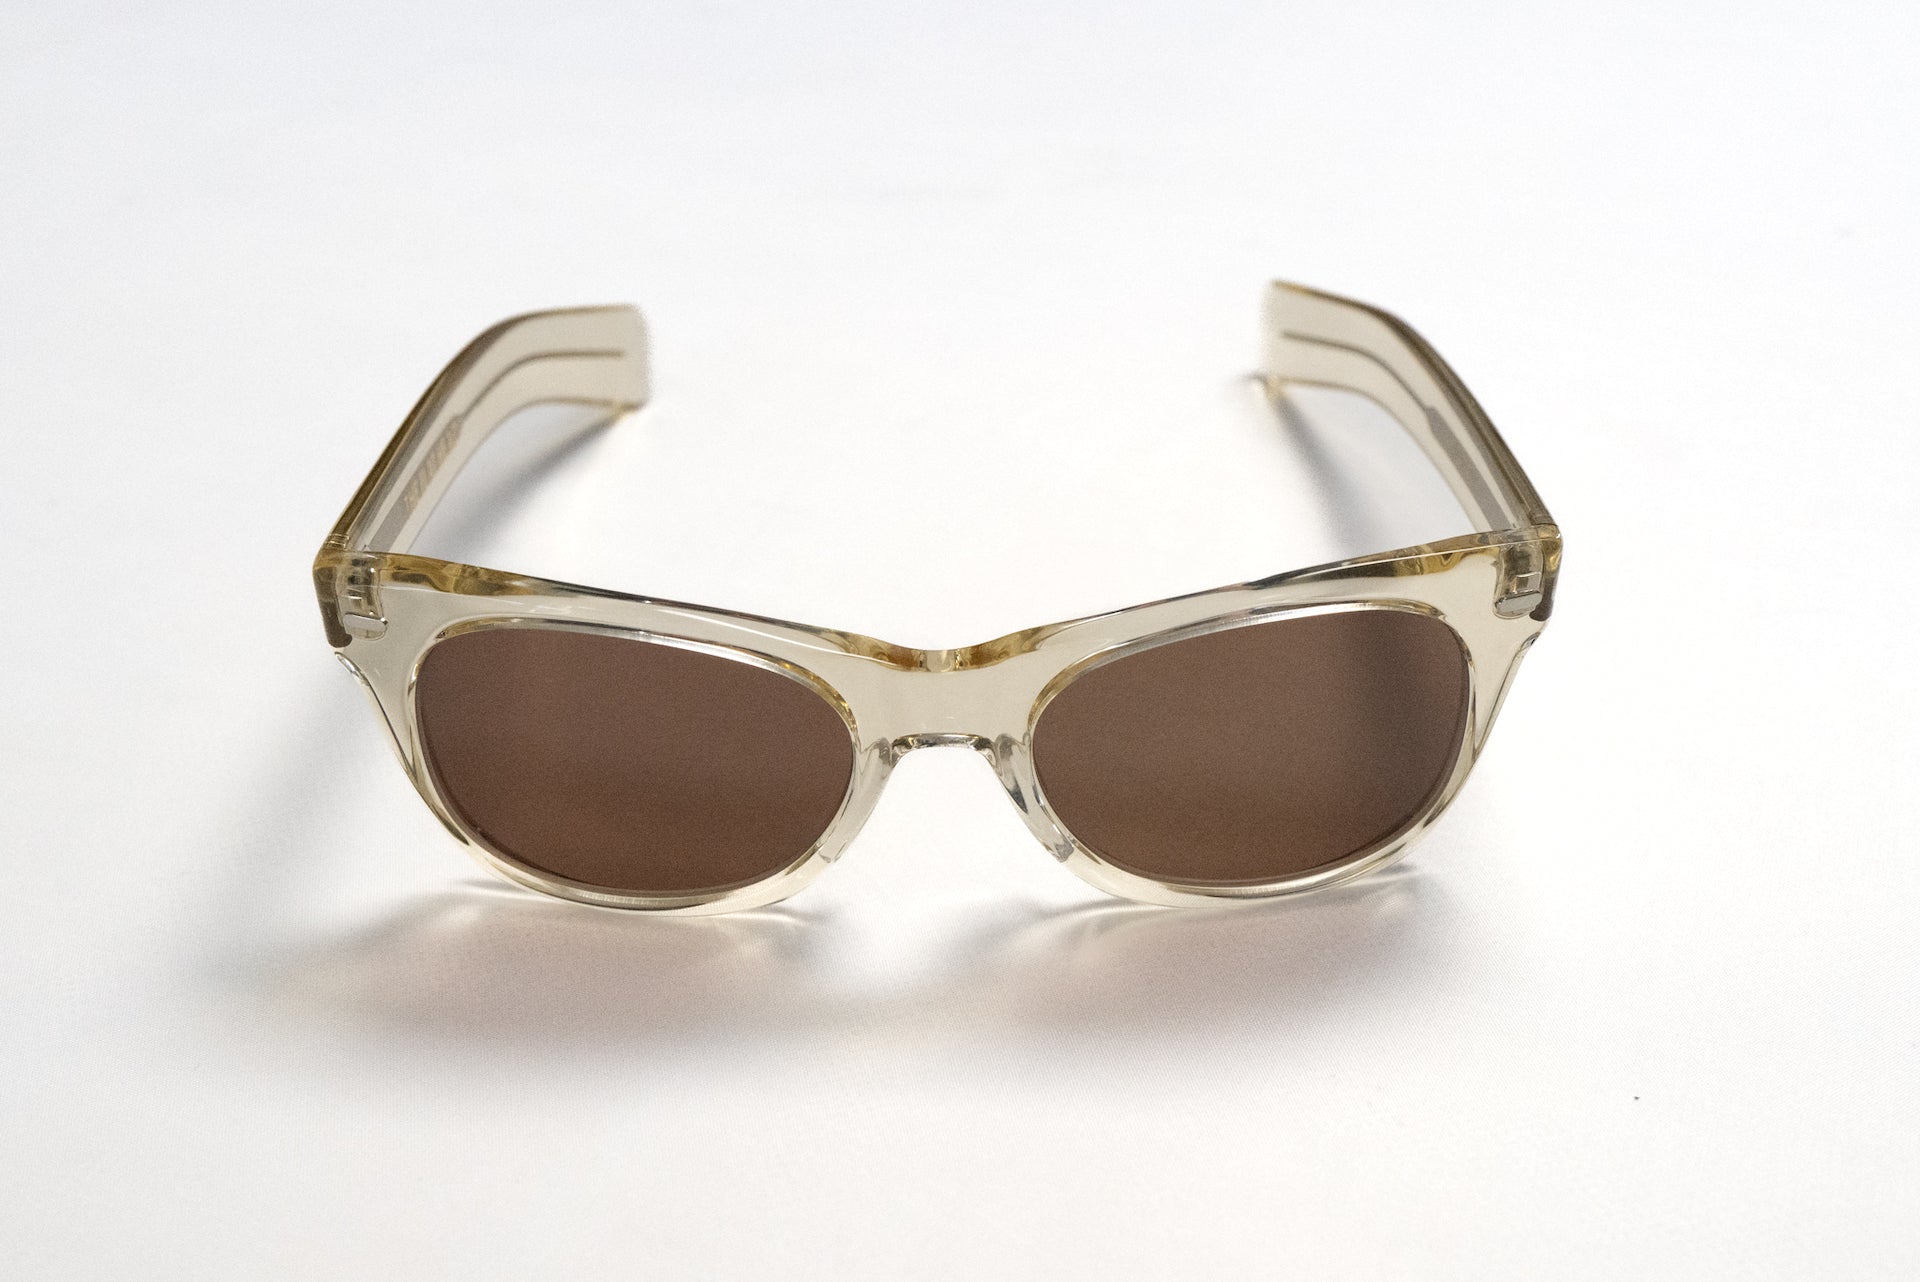 The Flat Head "Mid-Century" Acetate Sunglasses (Natural Clear)